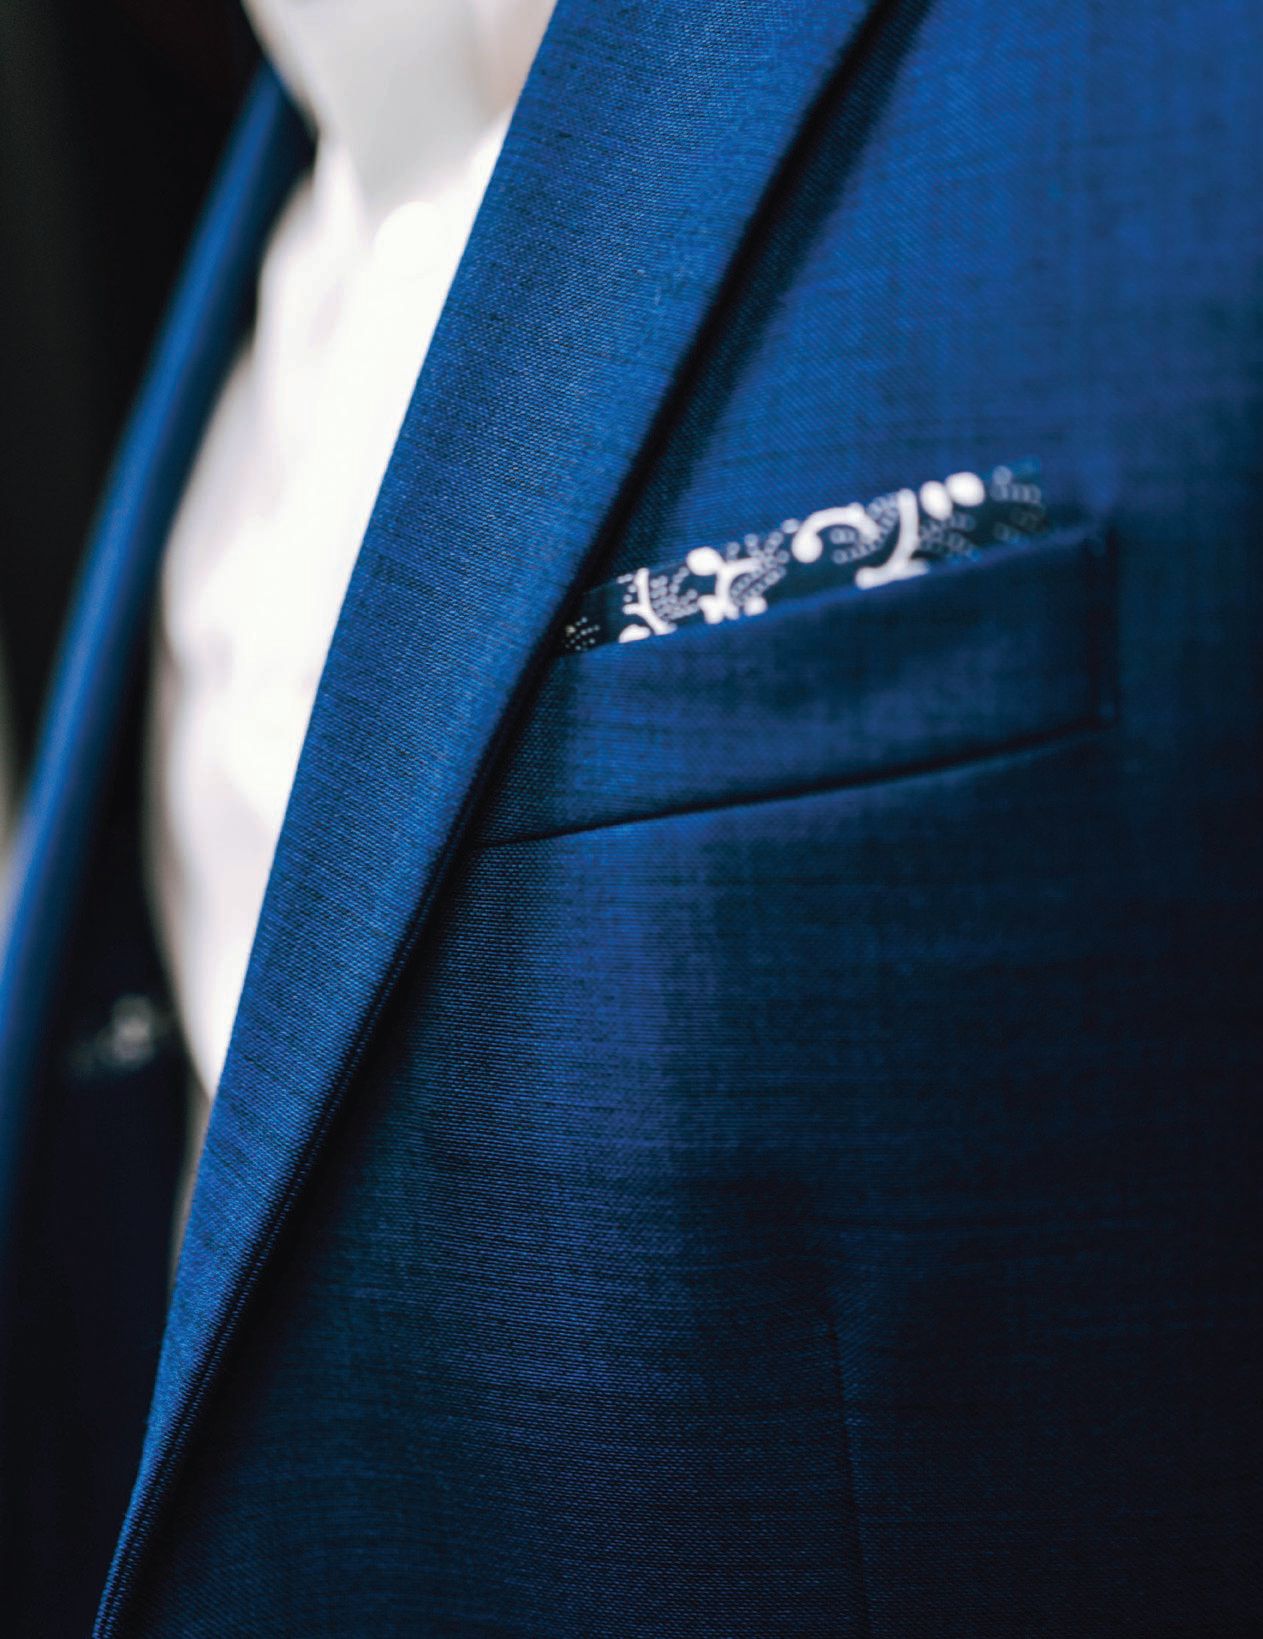 Blue suits (specifically navy) are a suggested jumping-off point from Robert Fung. PHOTO BY HERMES RIVERA/UNSPLASH